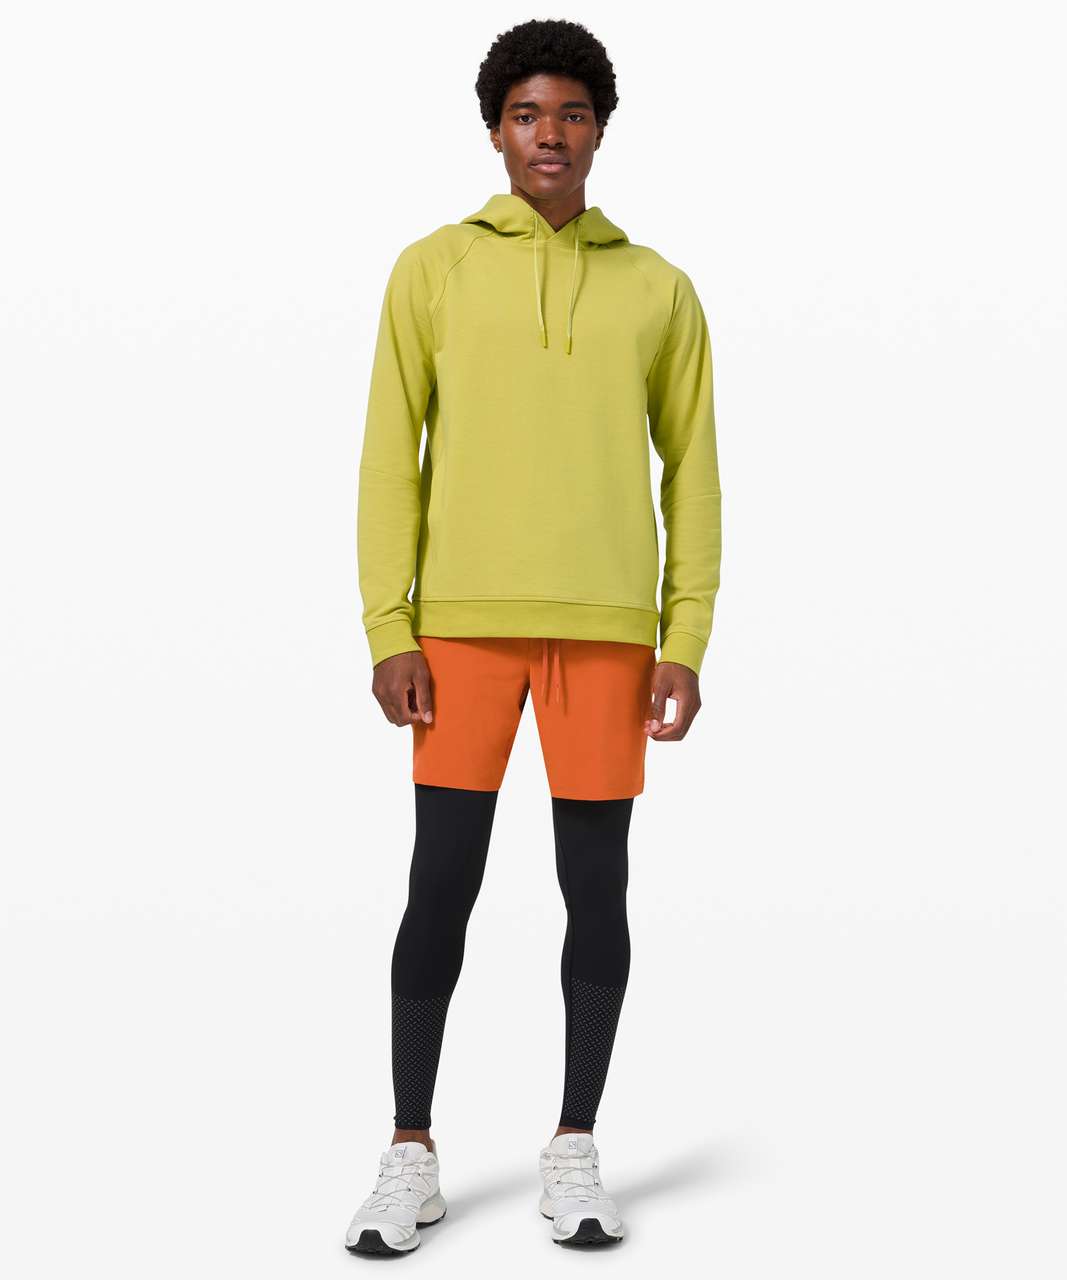 Lululemon City Sweat Pullover Hoodie French Terry - Yellow Pear